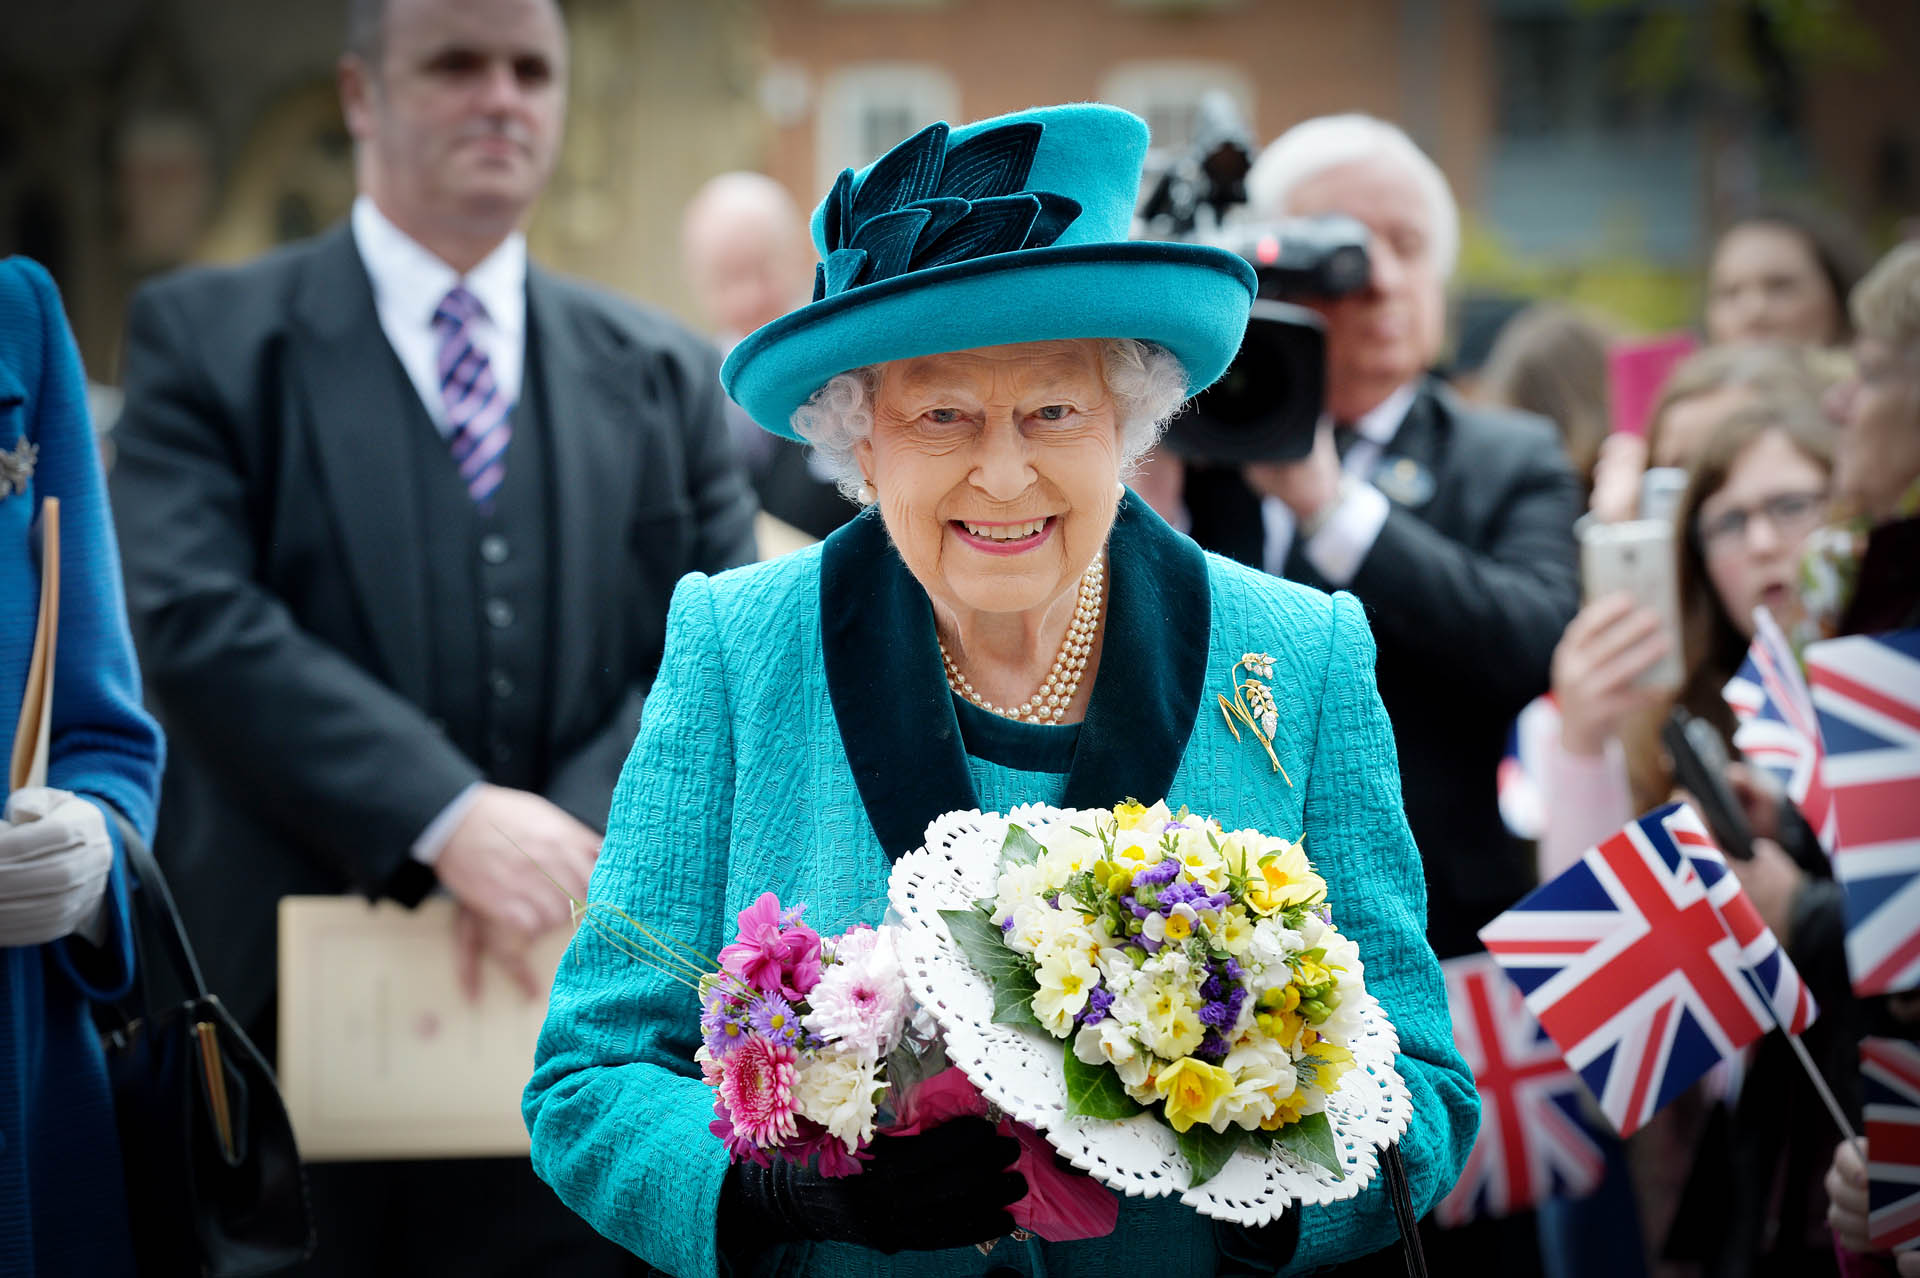 The Queen dressed in one of her trademark colourful outfits, Leicester, 2017 - Picture by Beth Walsh